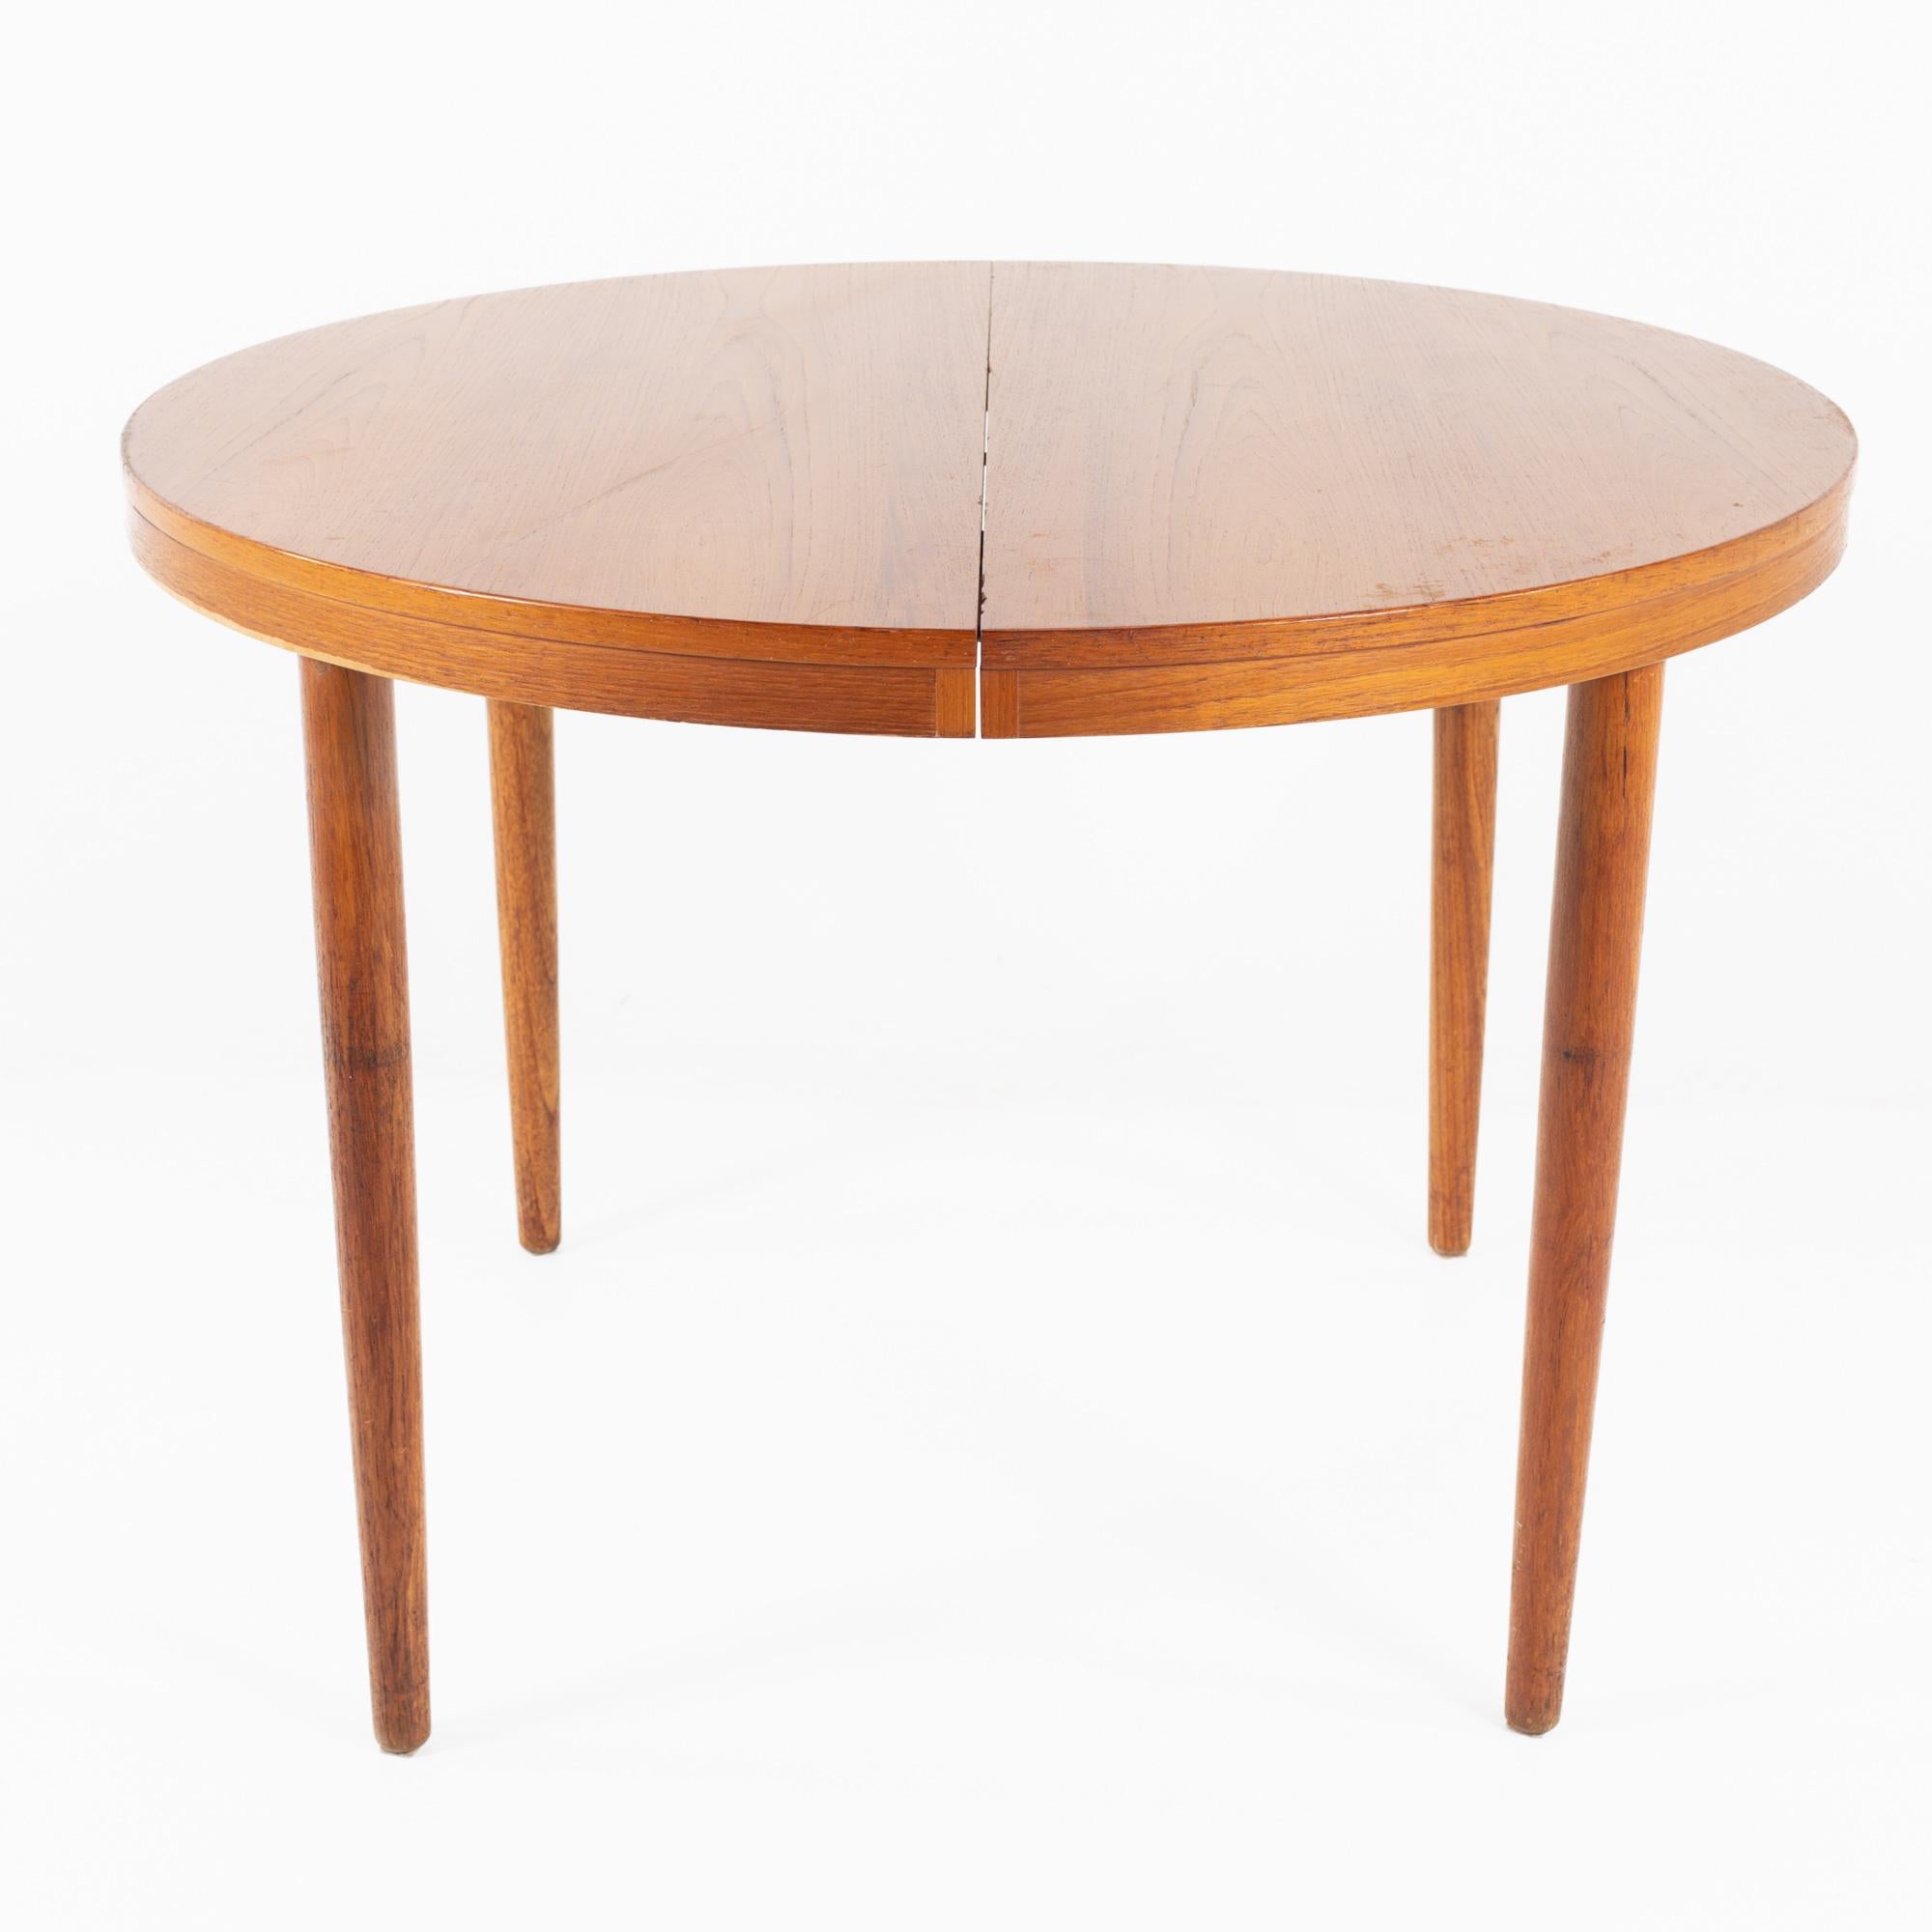 Moreddi style mid century danish round teak dining table

This table measures: 41 wide x 41 deep x 29 inches high, with a seat height of 26 inches

All pieces of furniture can be had in what we call restored vintage condition. That means the